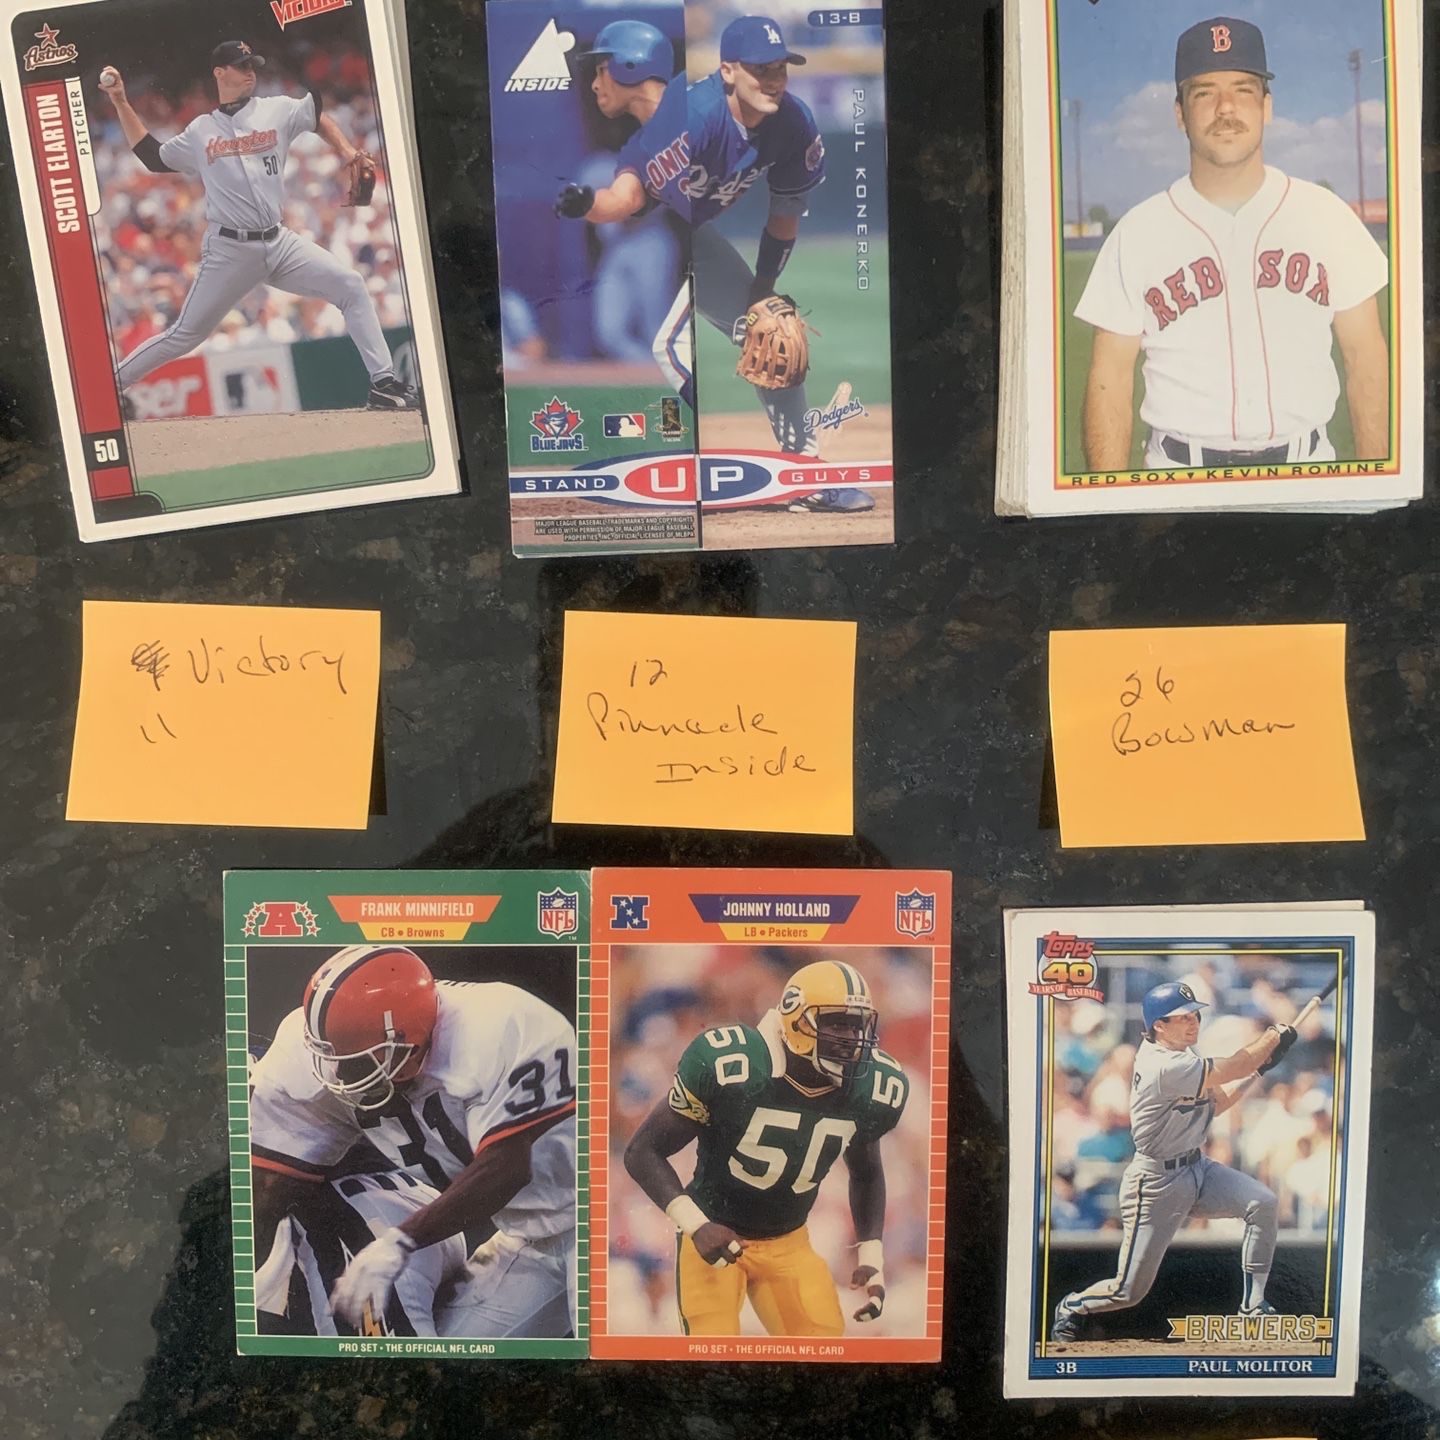 FREE Baseball Cards—Found Several More!